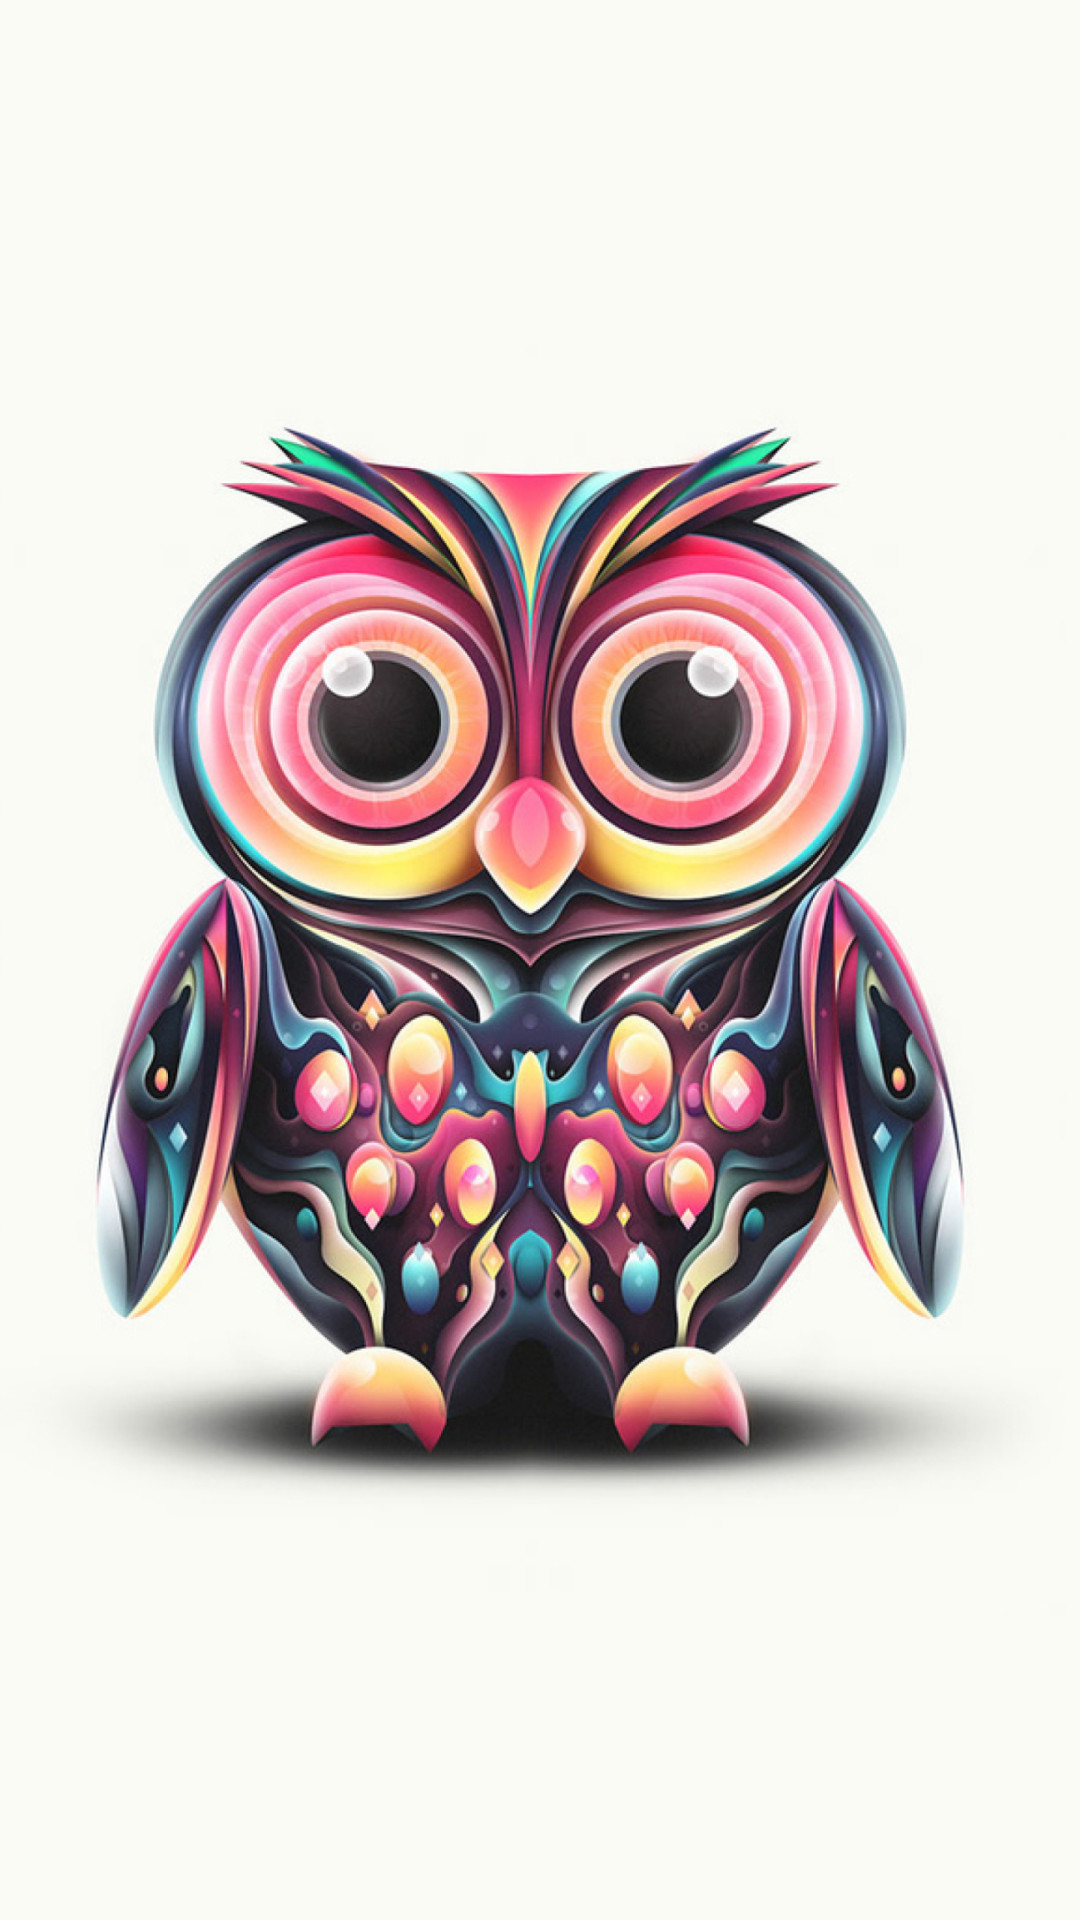 free wallpaper backgrounds for android,owl,pink,bird of prey,bird,purple